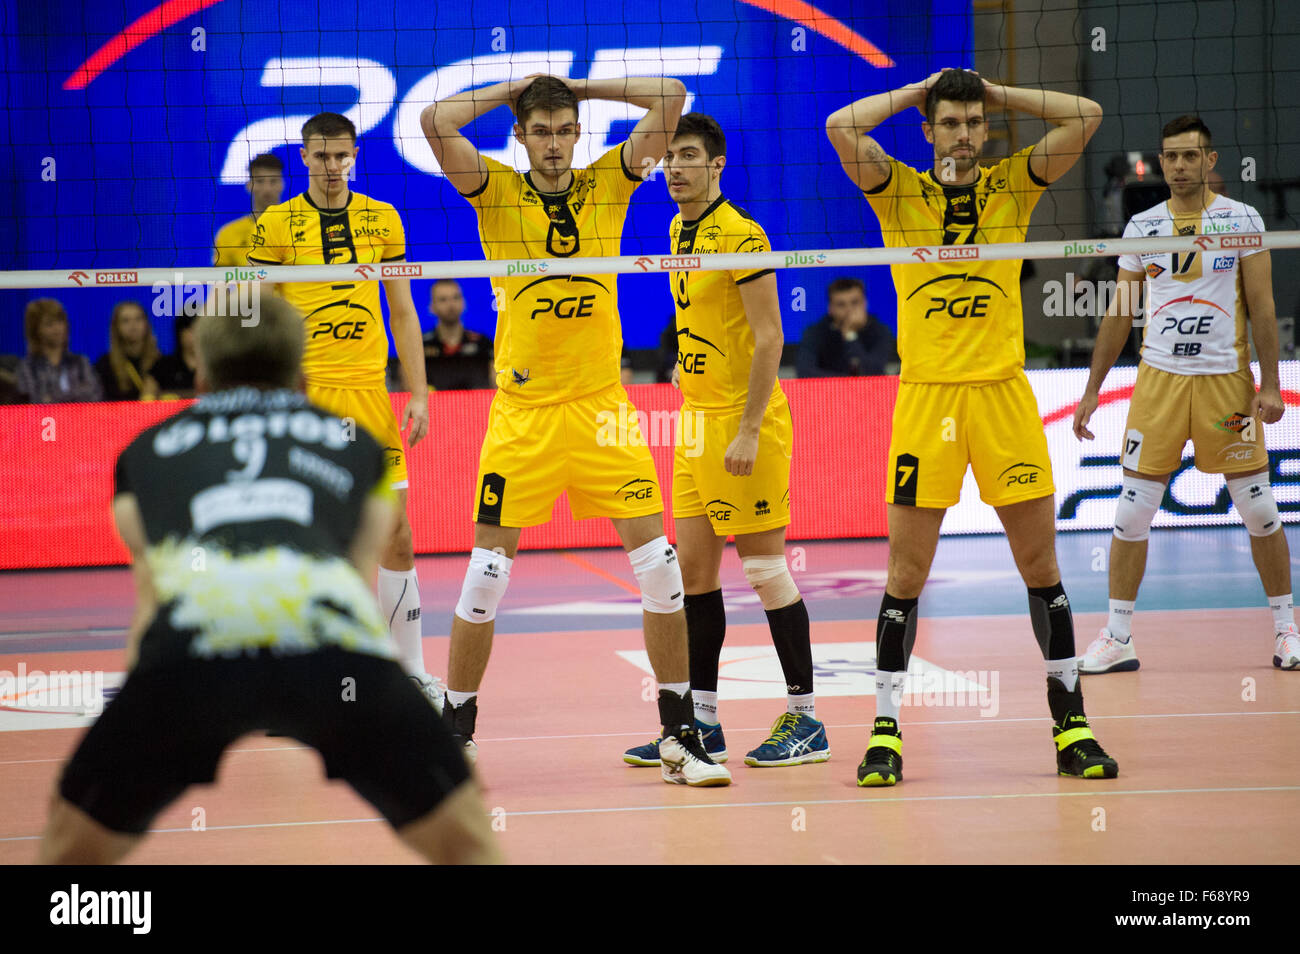 Belchatow, Poland. 14th November 2015. Team PGE Skra Belchatow, pictured during a game against Lotos Trefl Gdansk in the Plus Liga Polish Professional Volleyball League. Team PGE Skra went on to win 3-0. Credit:  Marcin Rozpedowski/Alamy Live News Stock Photo